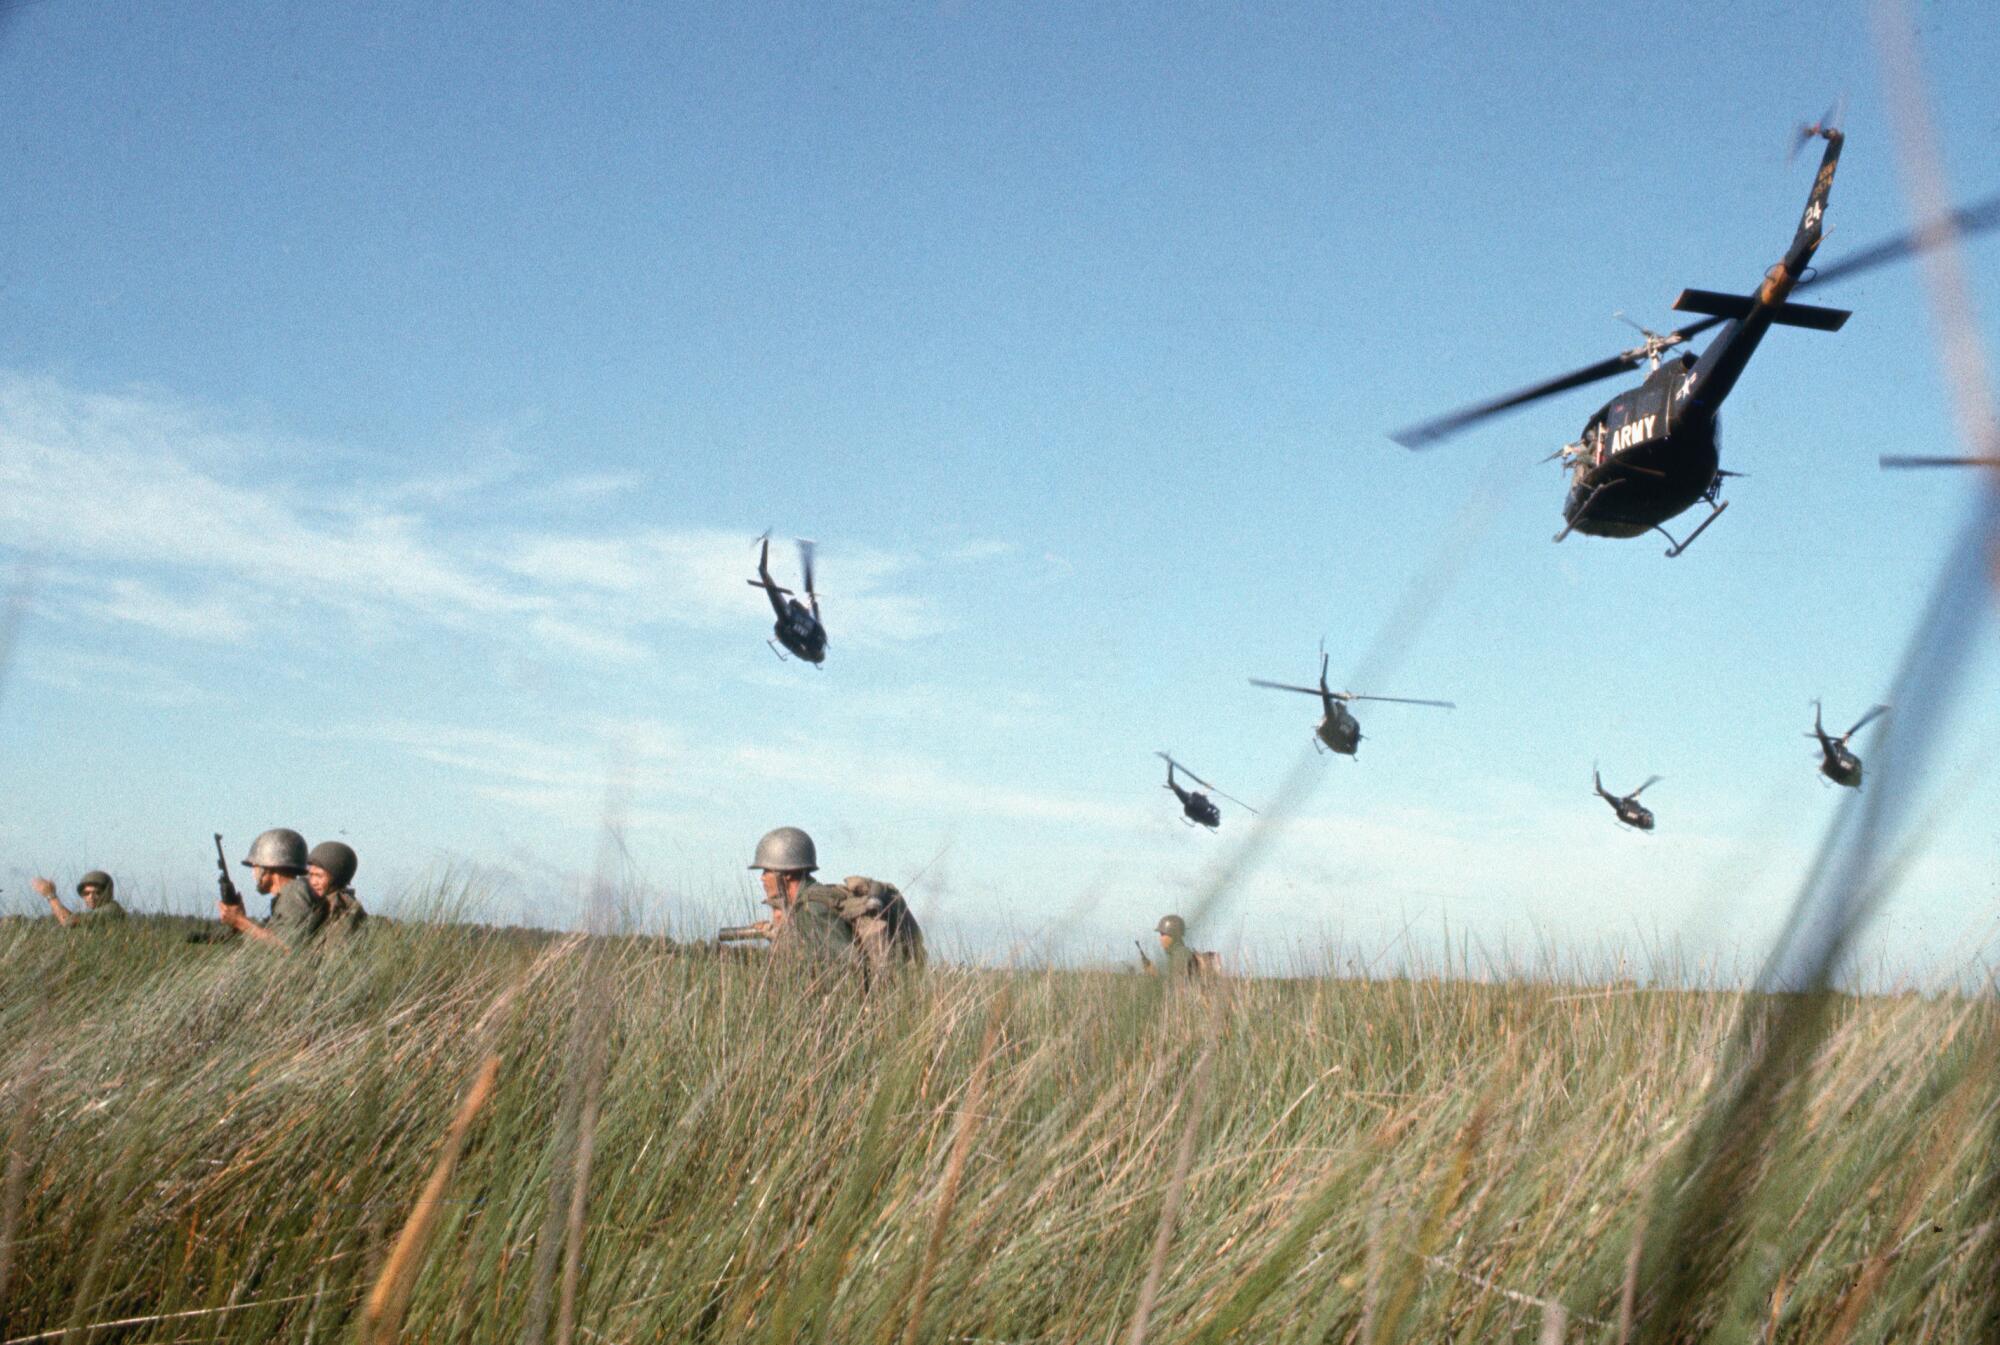 ARVN (South Vietnamese army) rangers, supported by helicopters, make their way through 